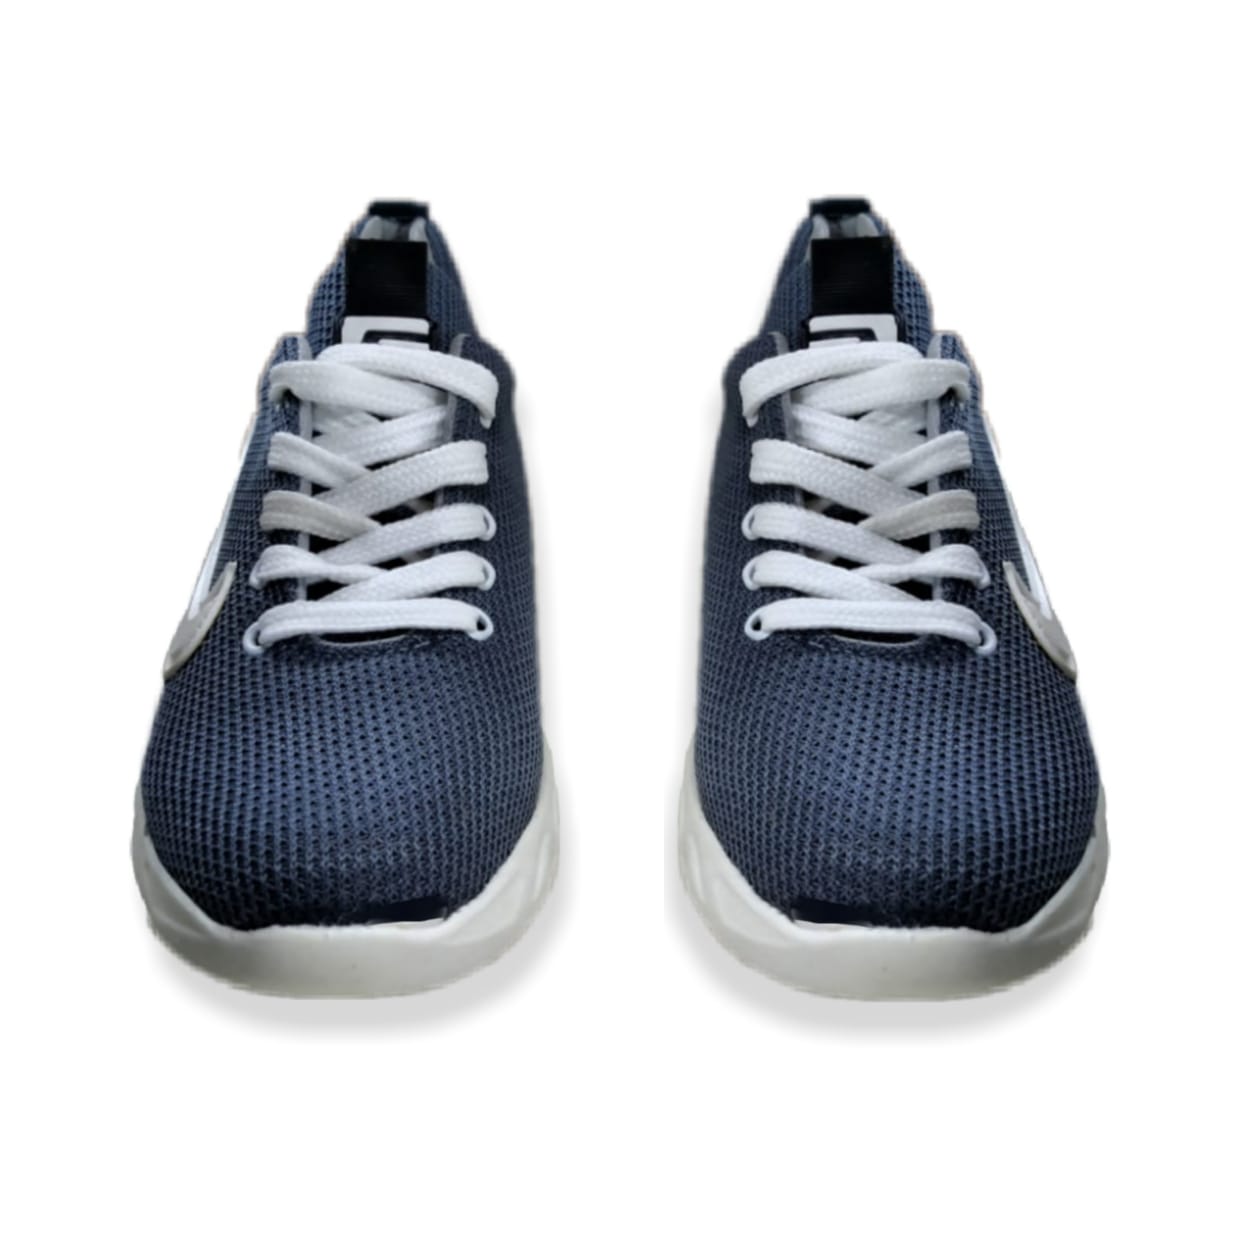 purchase mens sneakers online